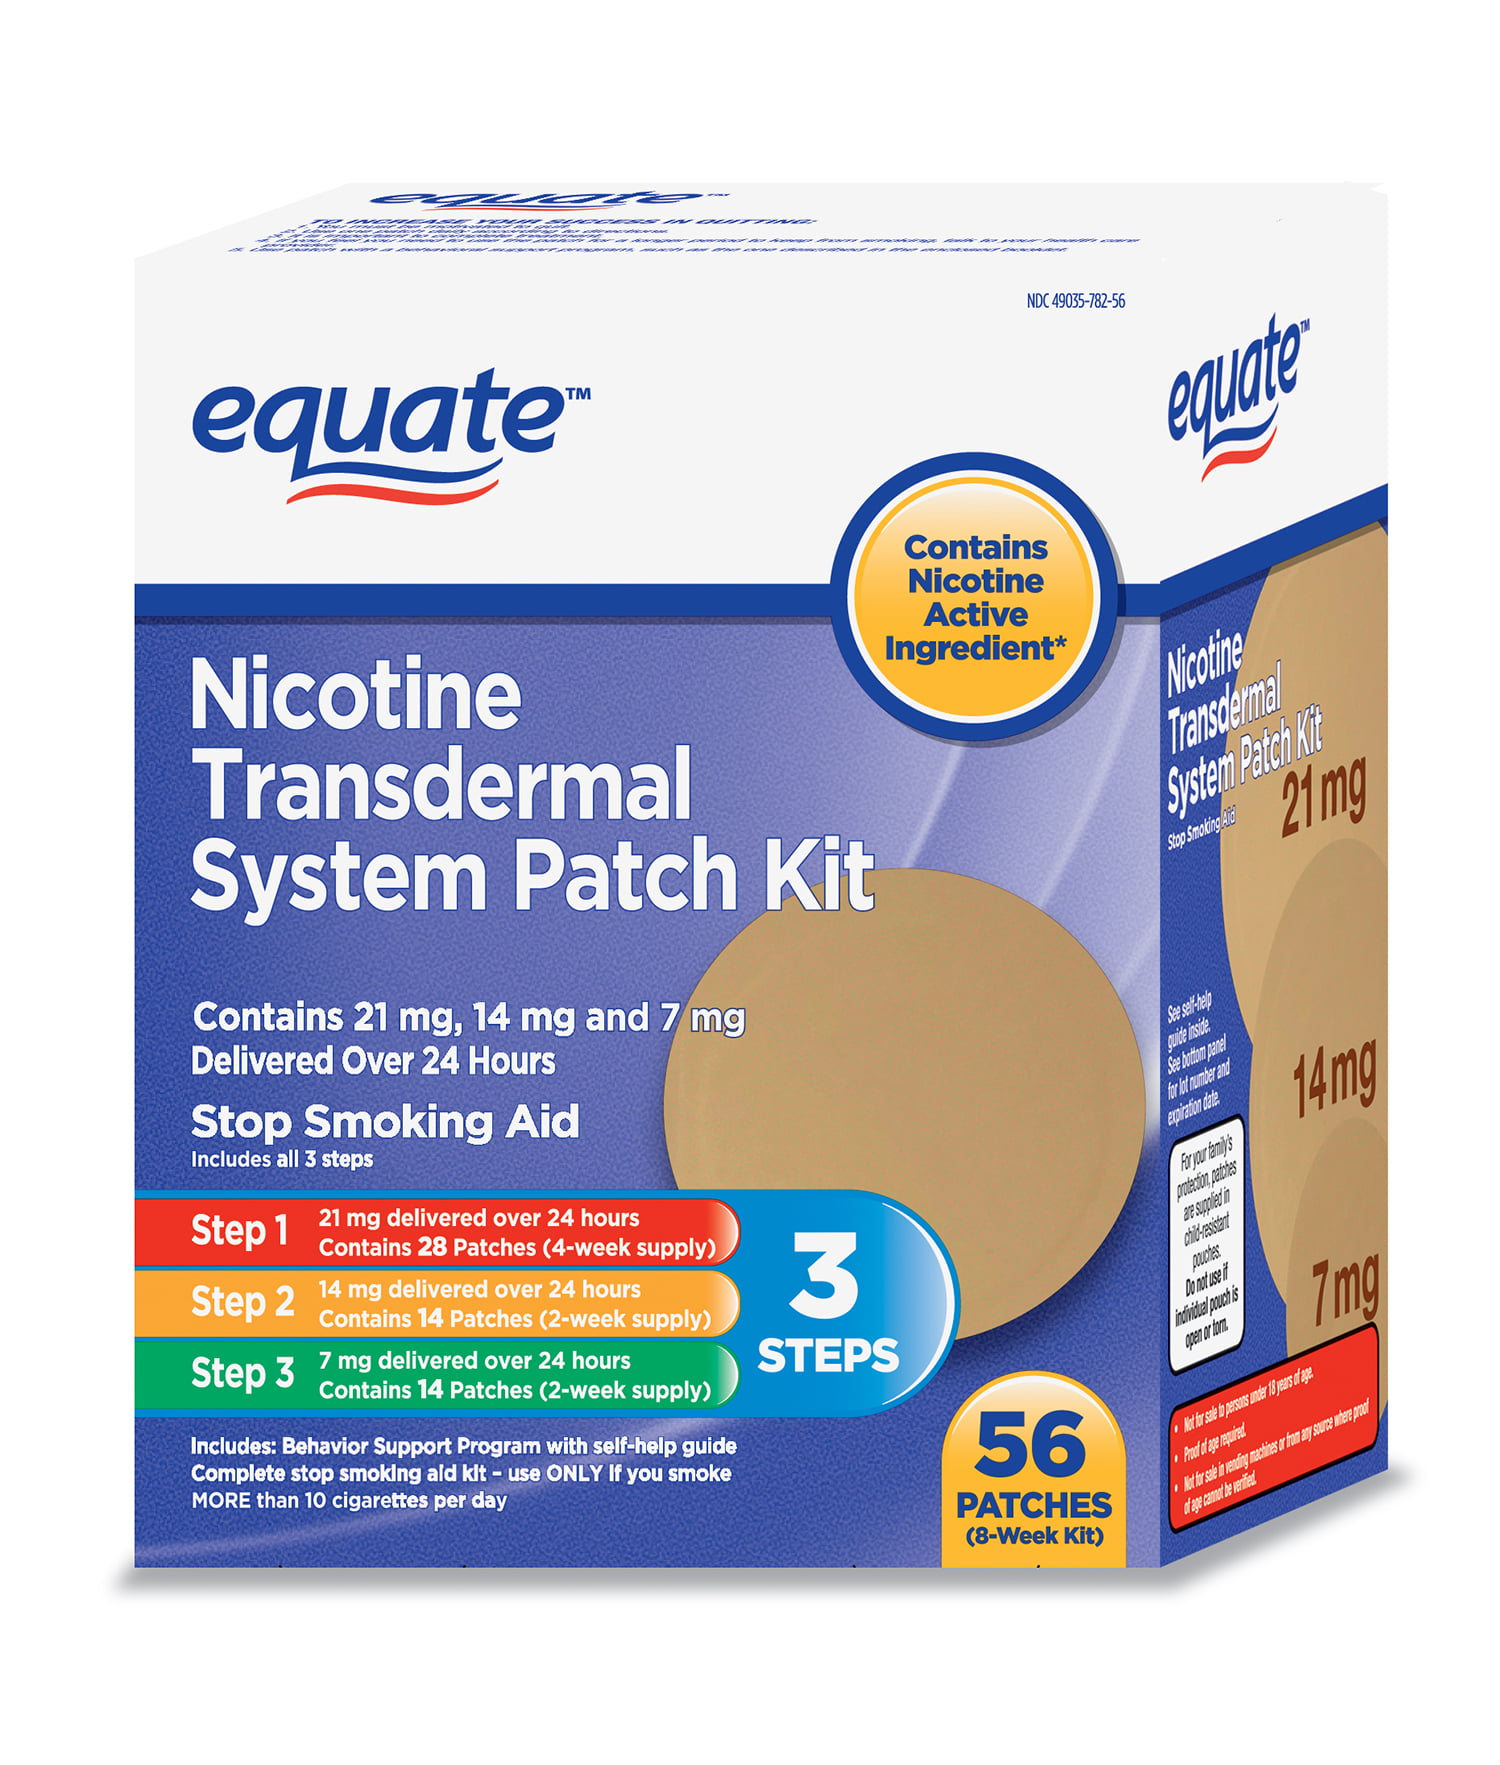 what-does-pfizer-s-chantix-is-no-better-than-nicotine-patches-study